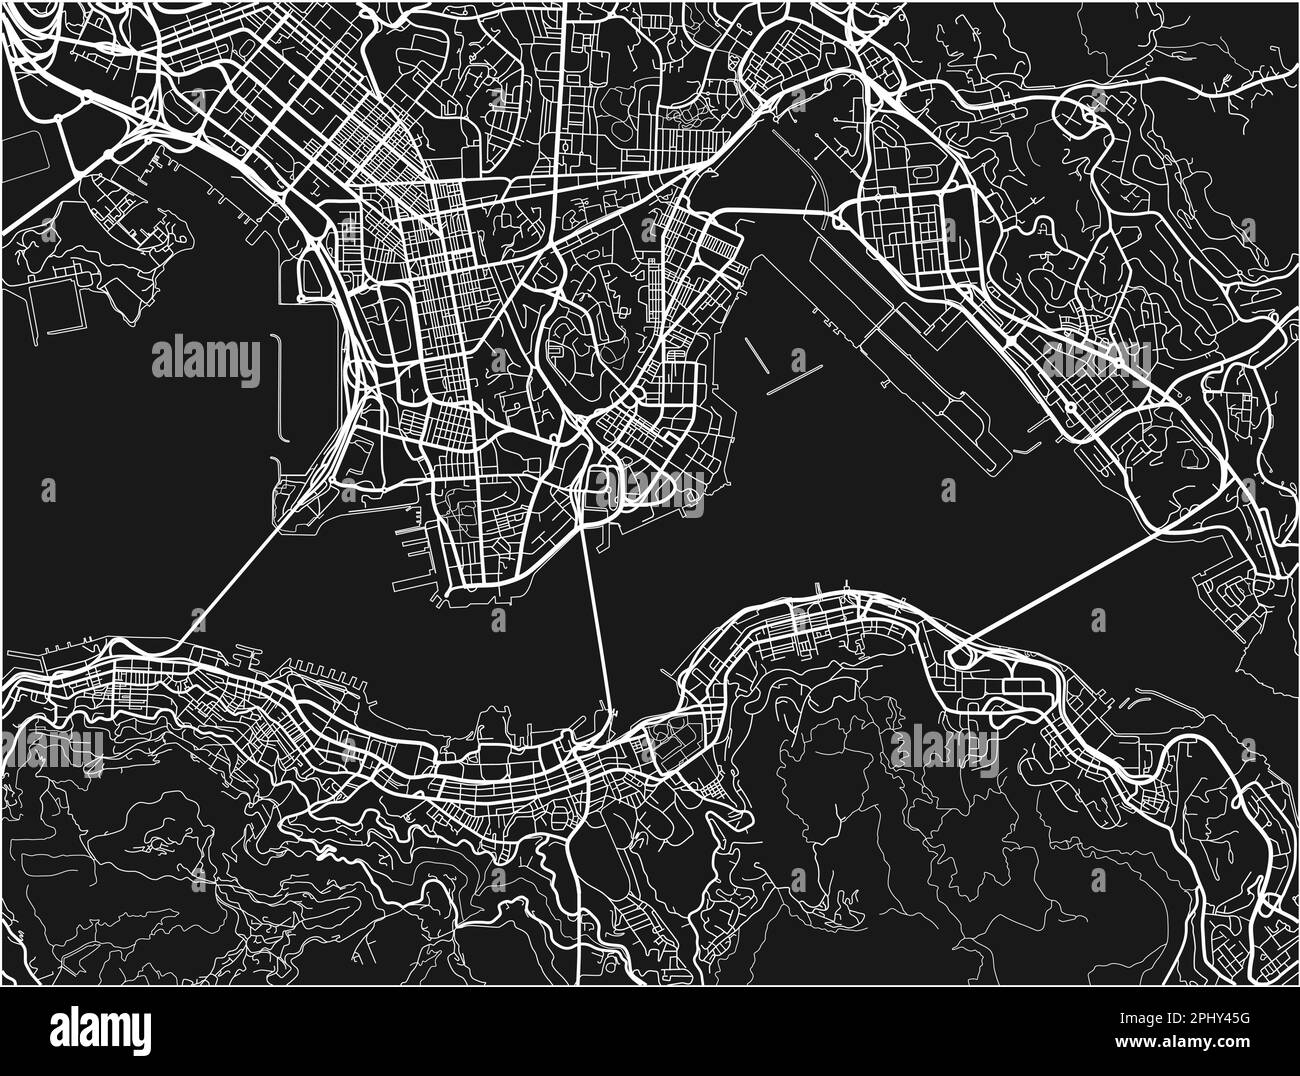 Black and white vector city map of Hong Kong with well organized ...